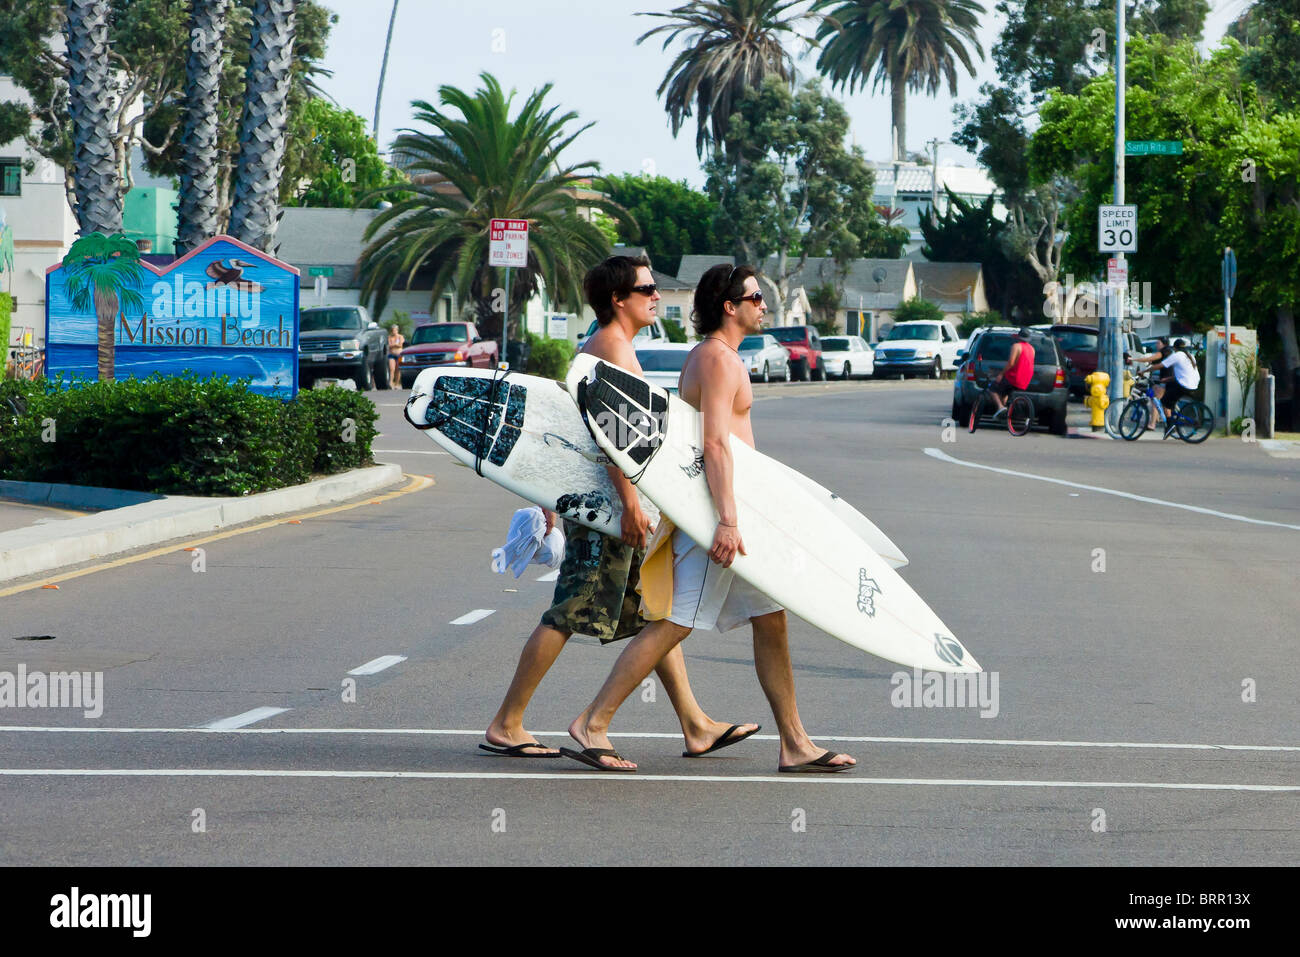 Surfers Crossing the Street, Mission Beach, California Stock Photo